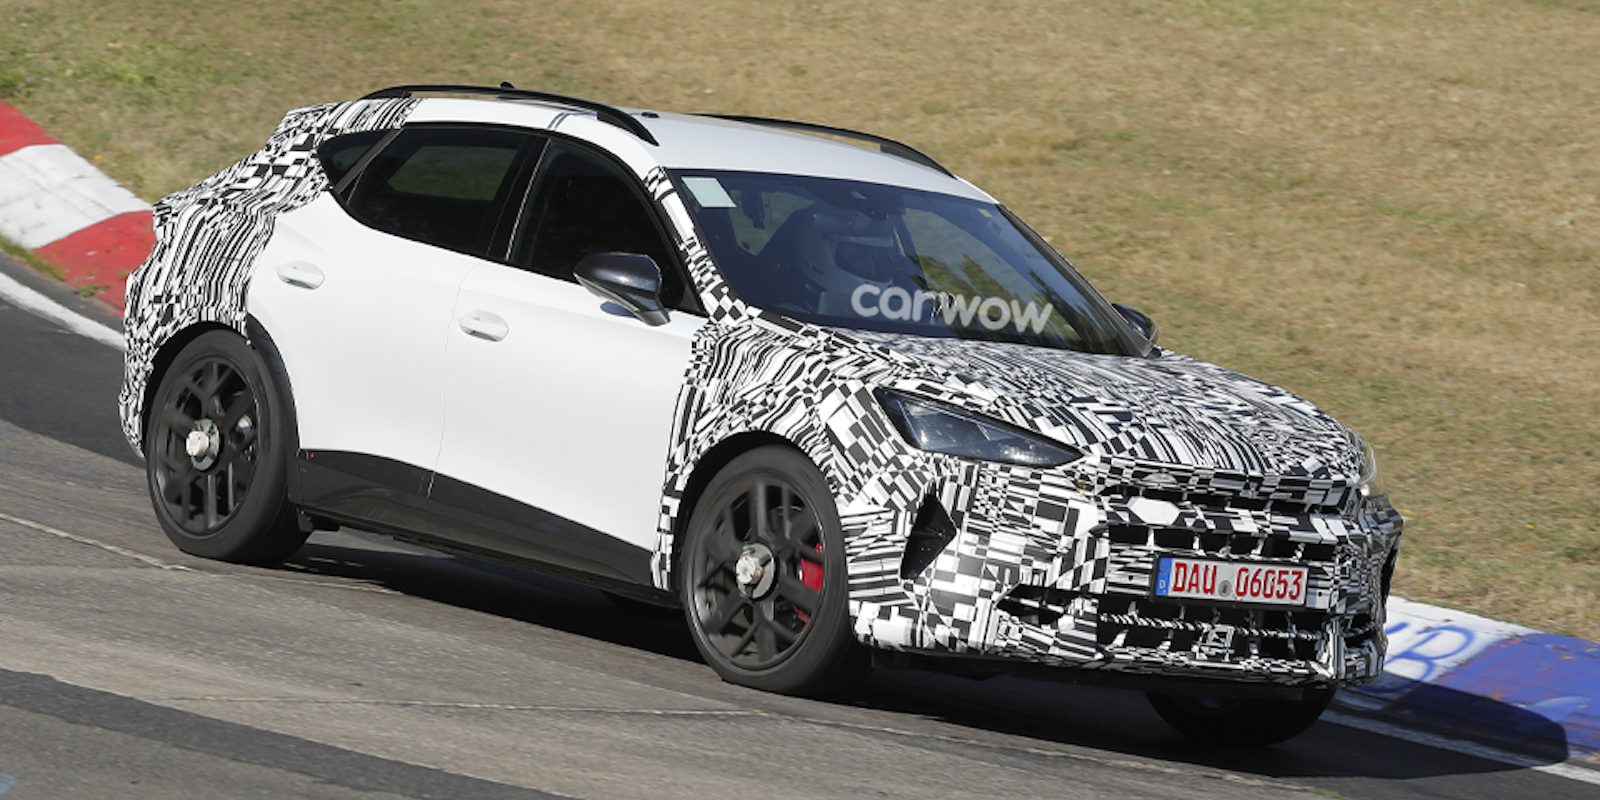 New Cupra Formentor spotted: here's what we know so far